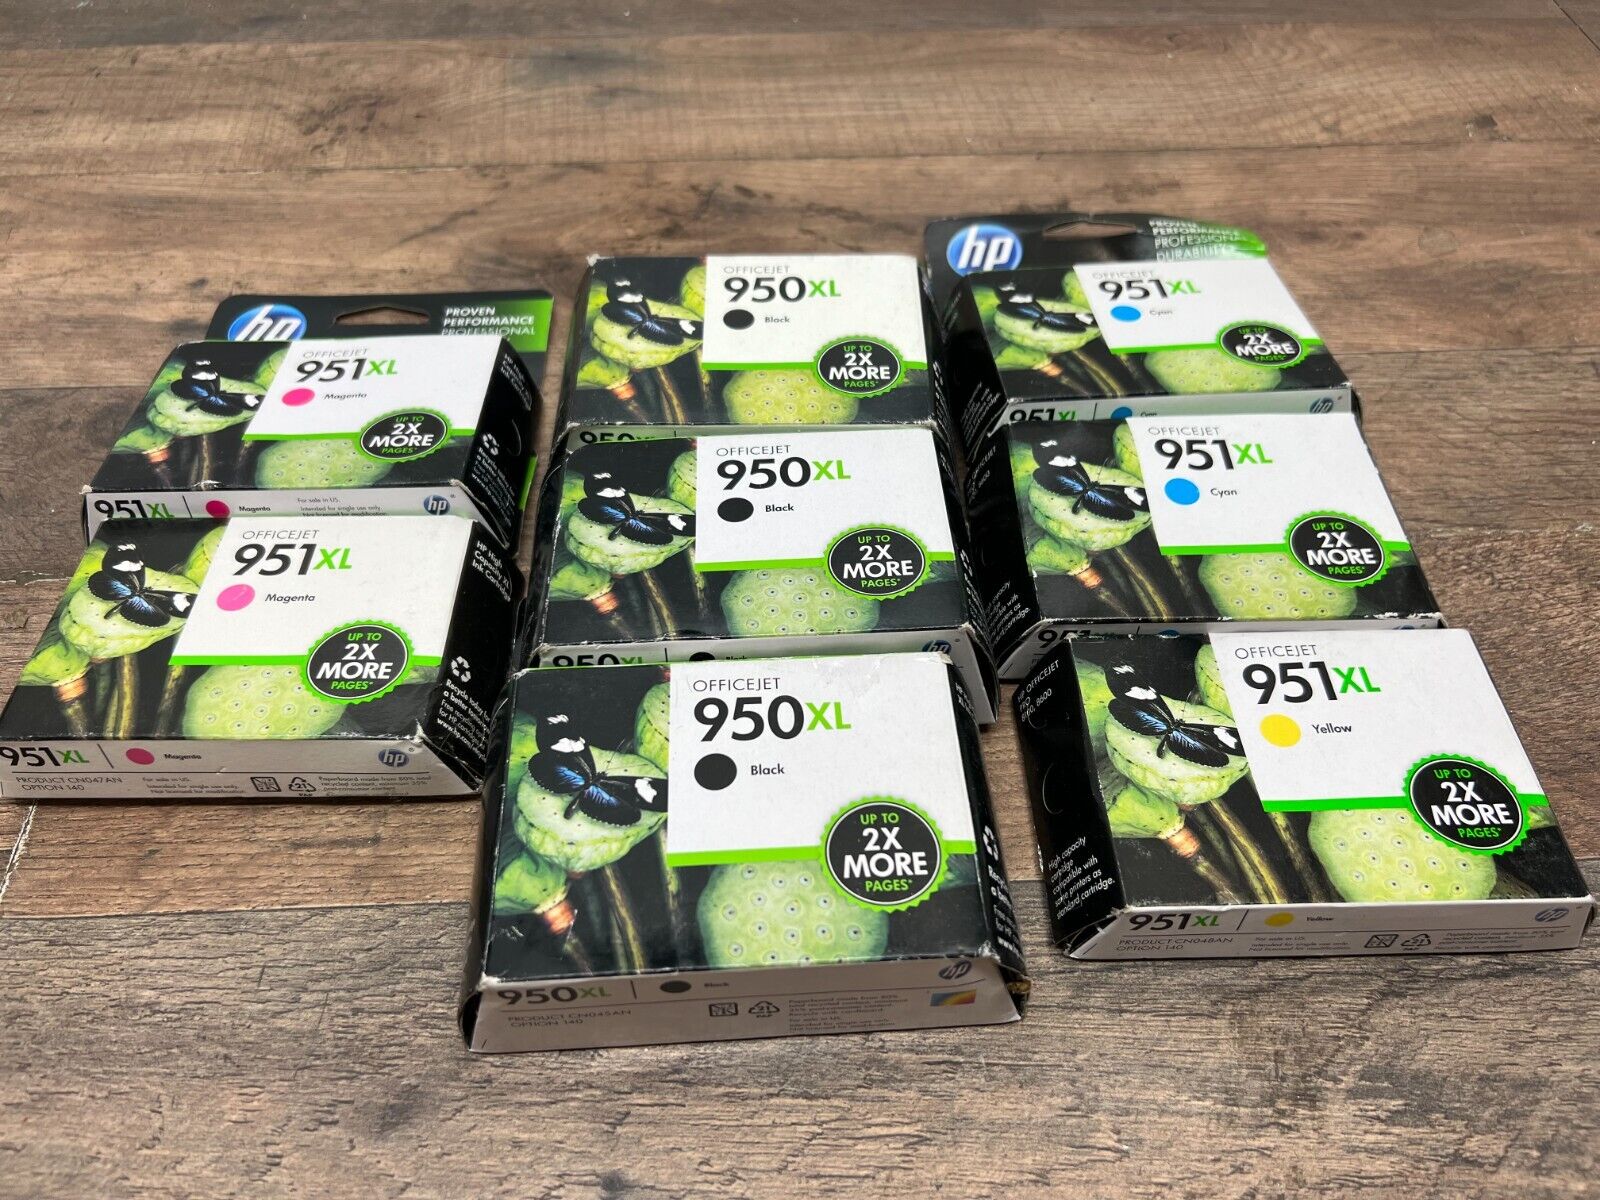 Expired lot of 8 New HP Officejet 950XL and 951 Ink Cartridges EXP 2014, -2016